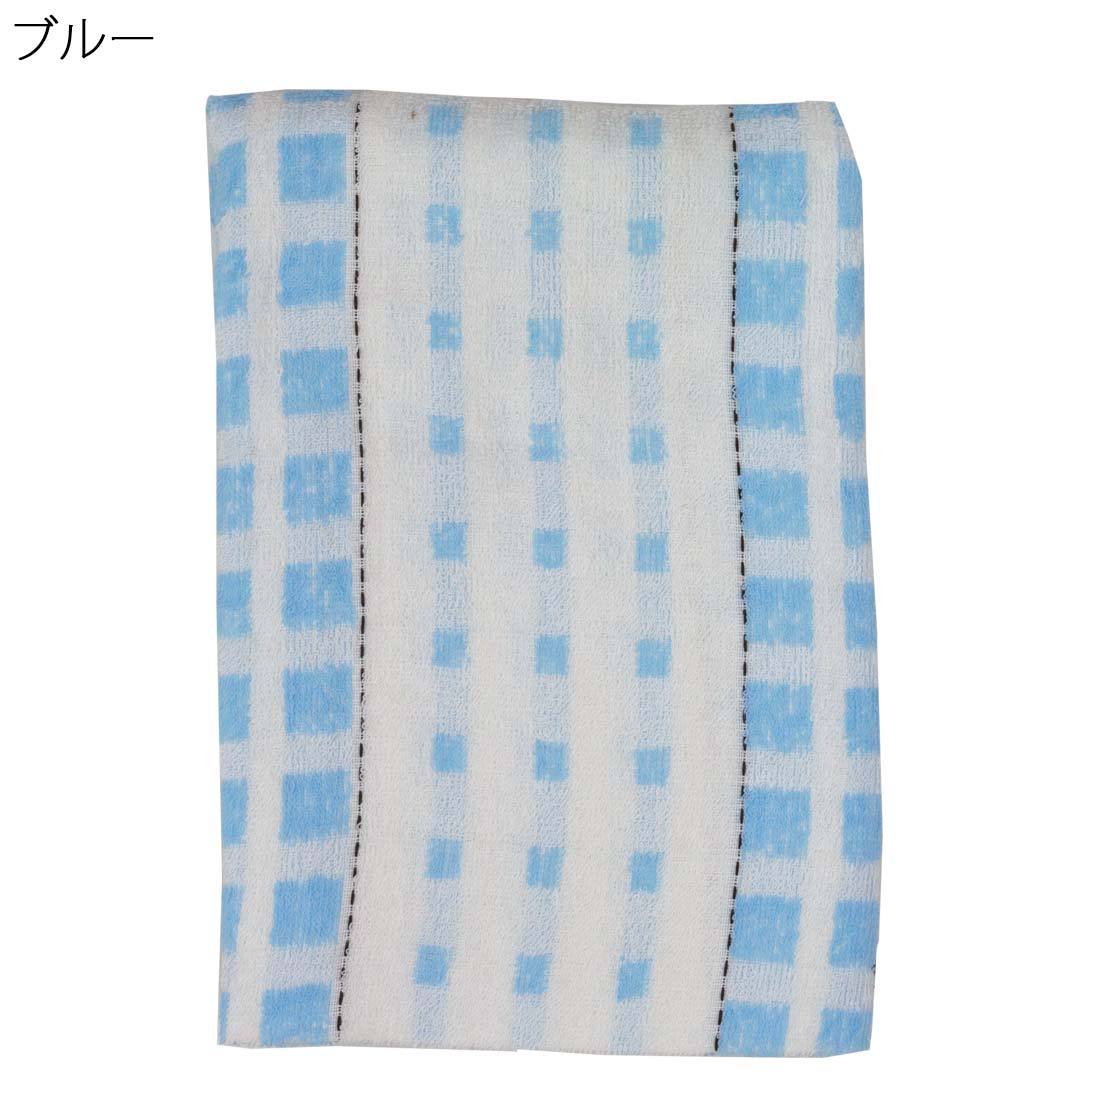 do Be bath towel tei service * go in .* nursing facility embroidery name name inserting name attaching name embroidery towel name entering embroidery towel 